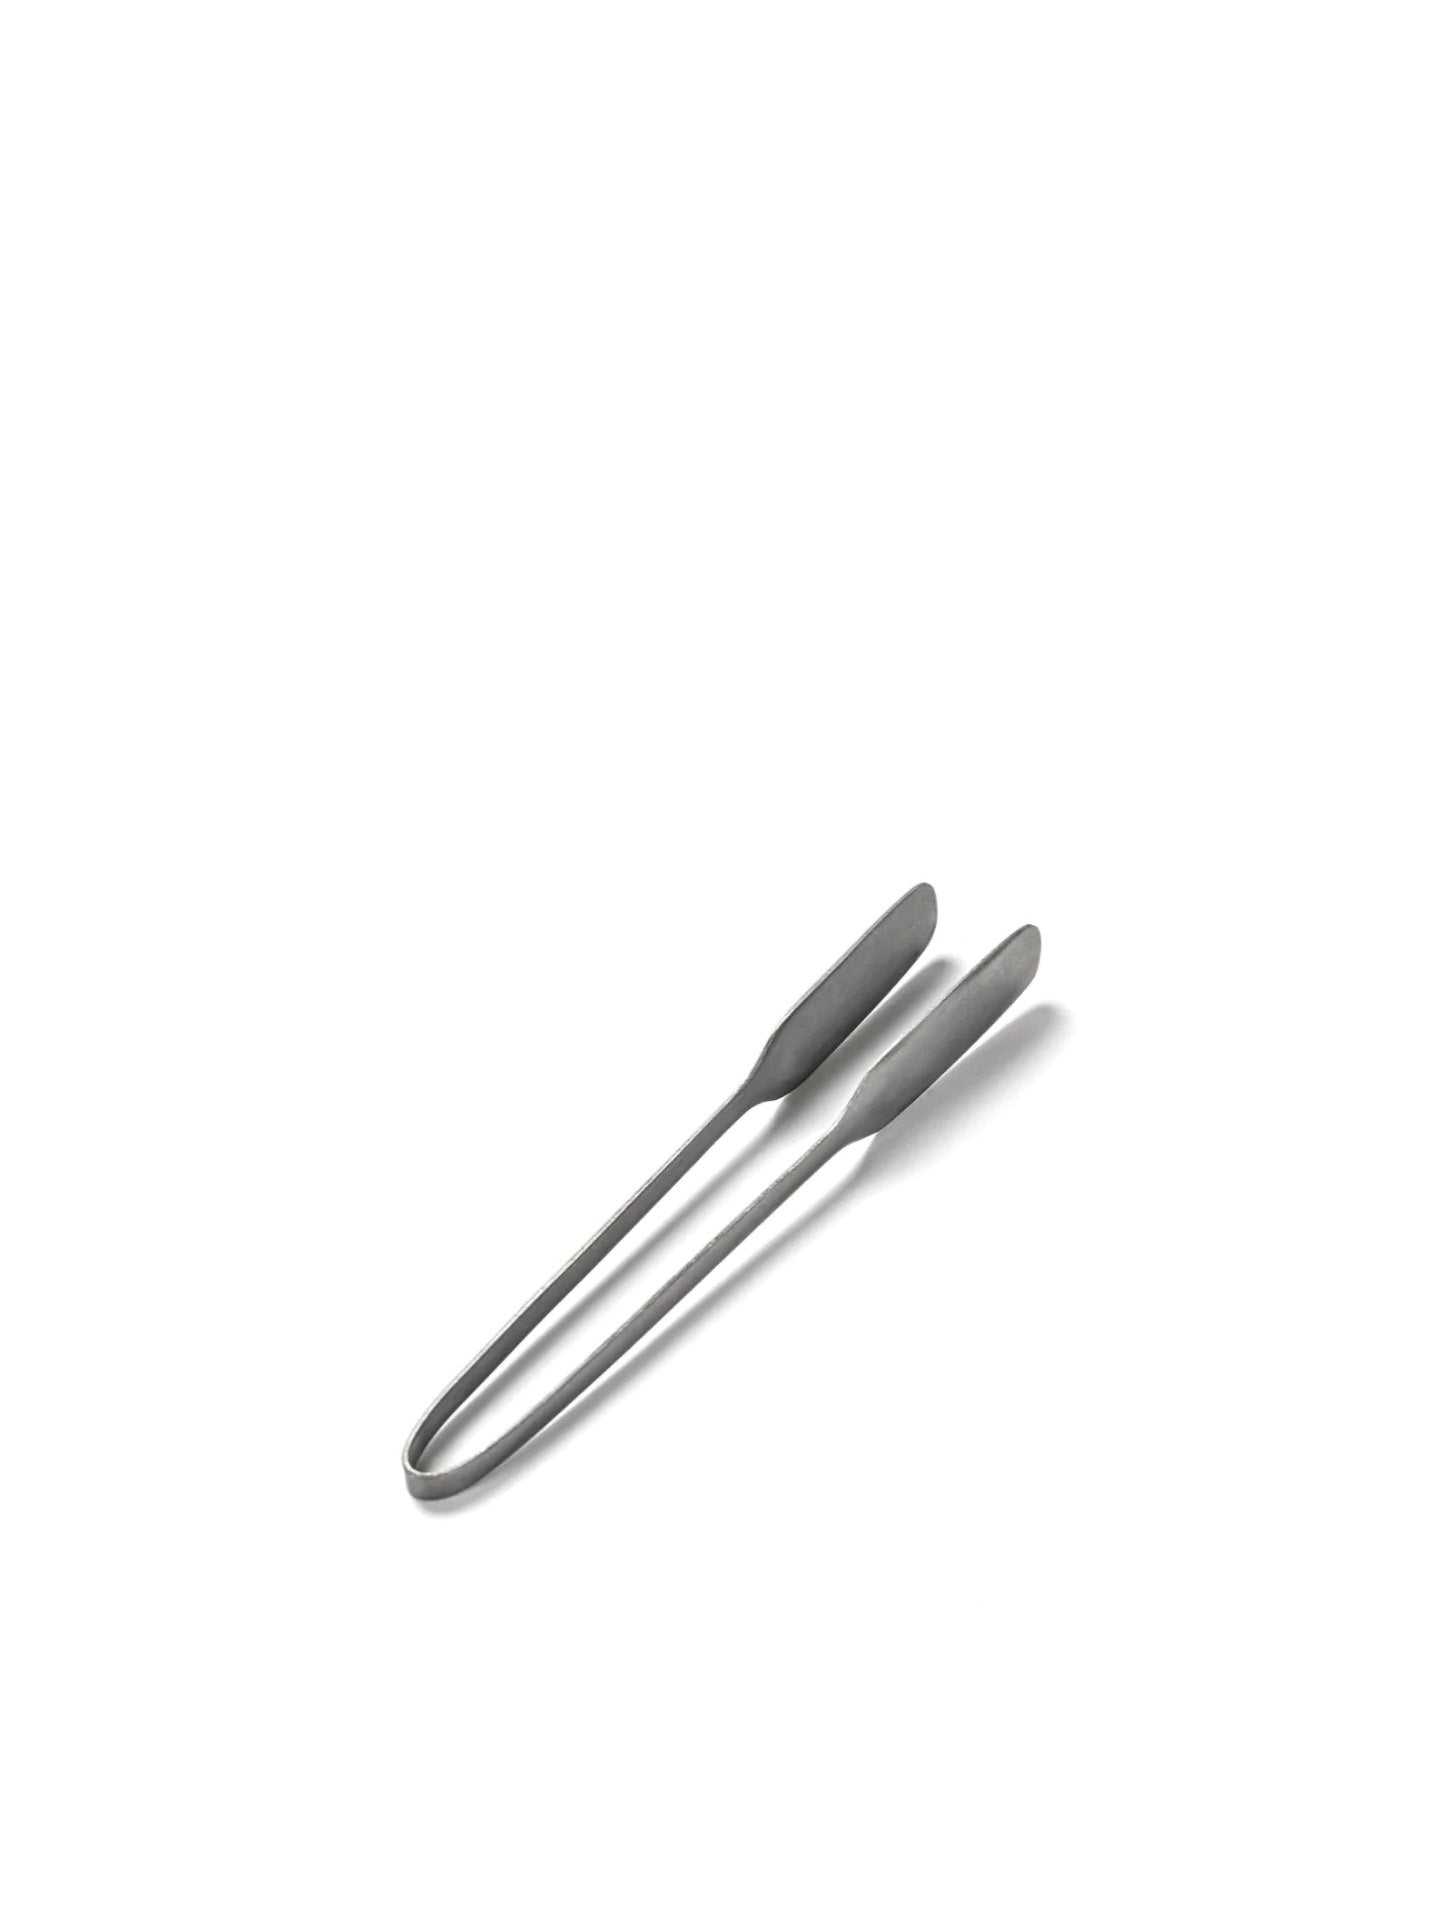 Tongs from La Nouvelle Table Collection are small and cute, only 14 centimeters long.